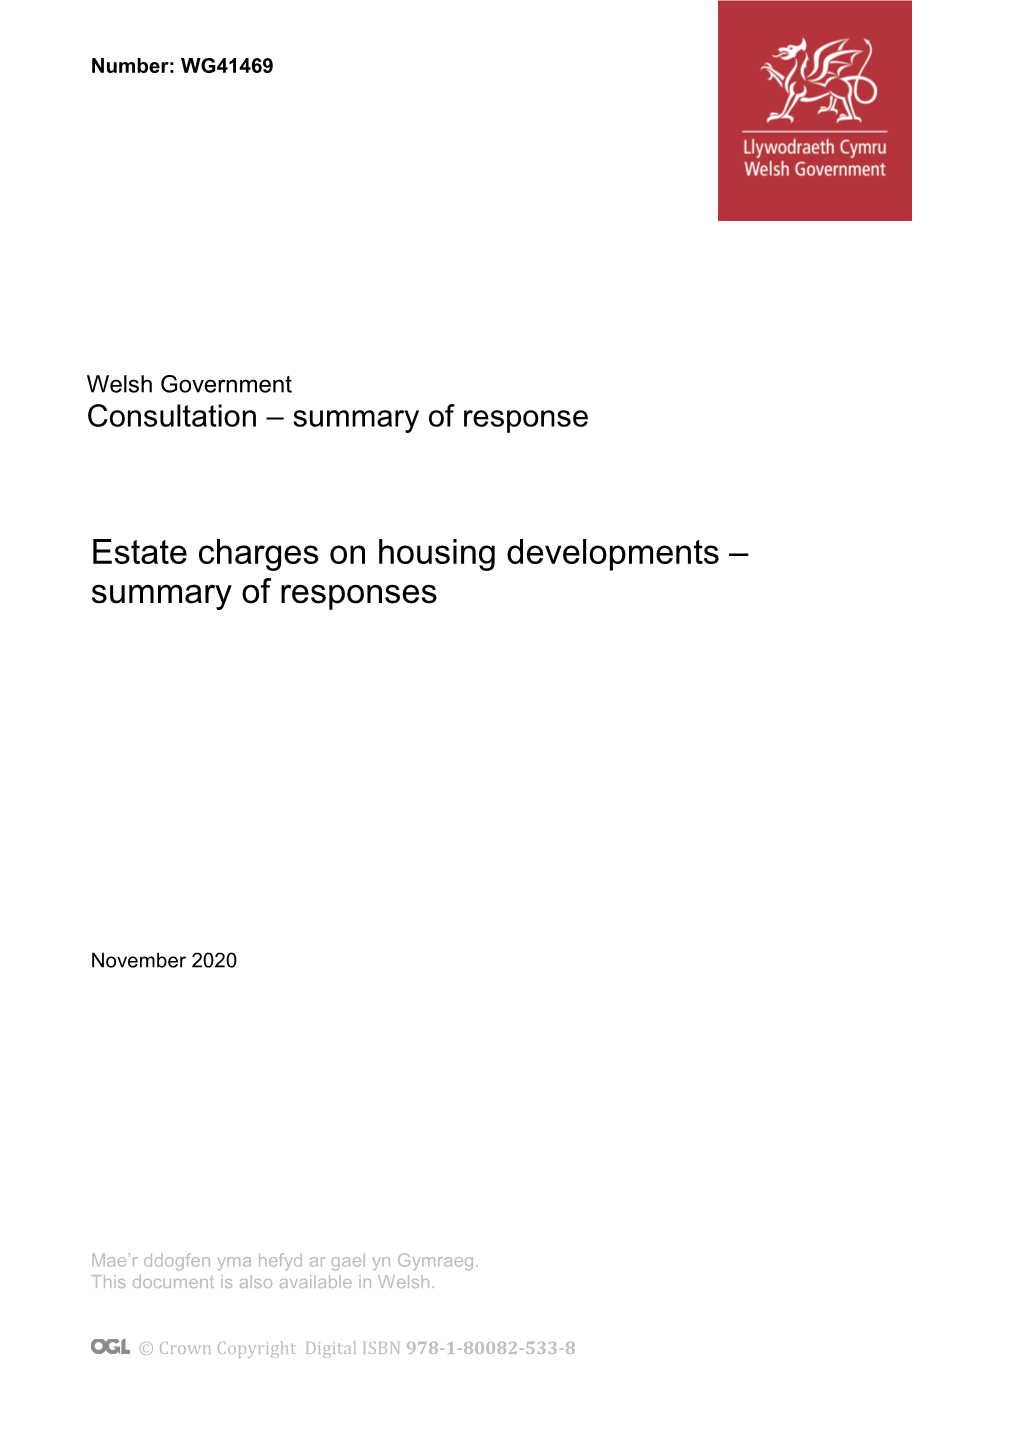 Estate Charges on Housing Developments – Summary of Responses